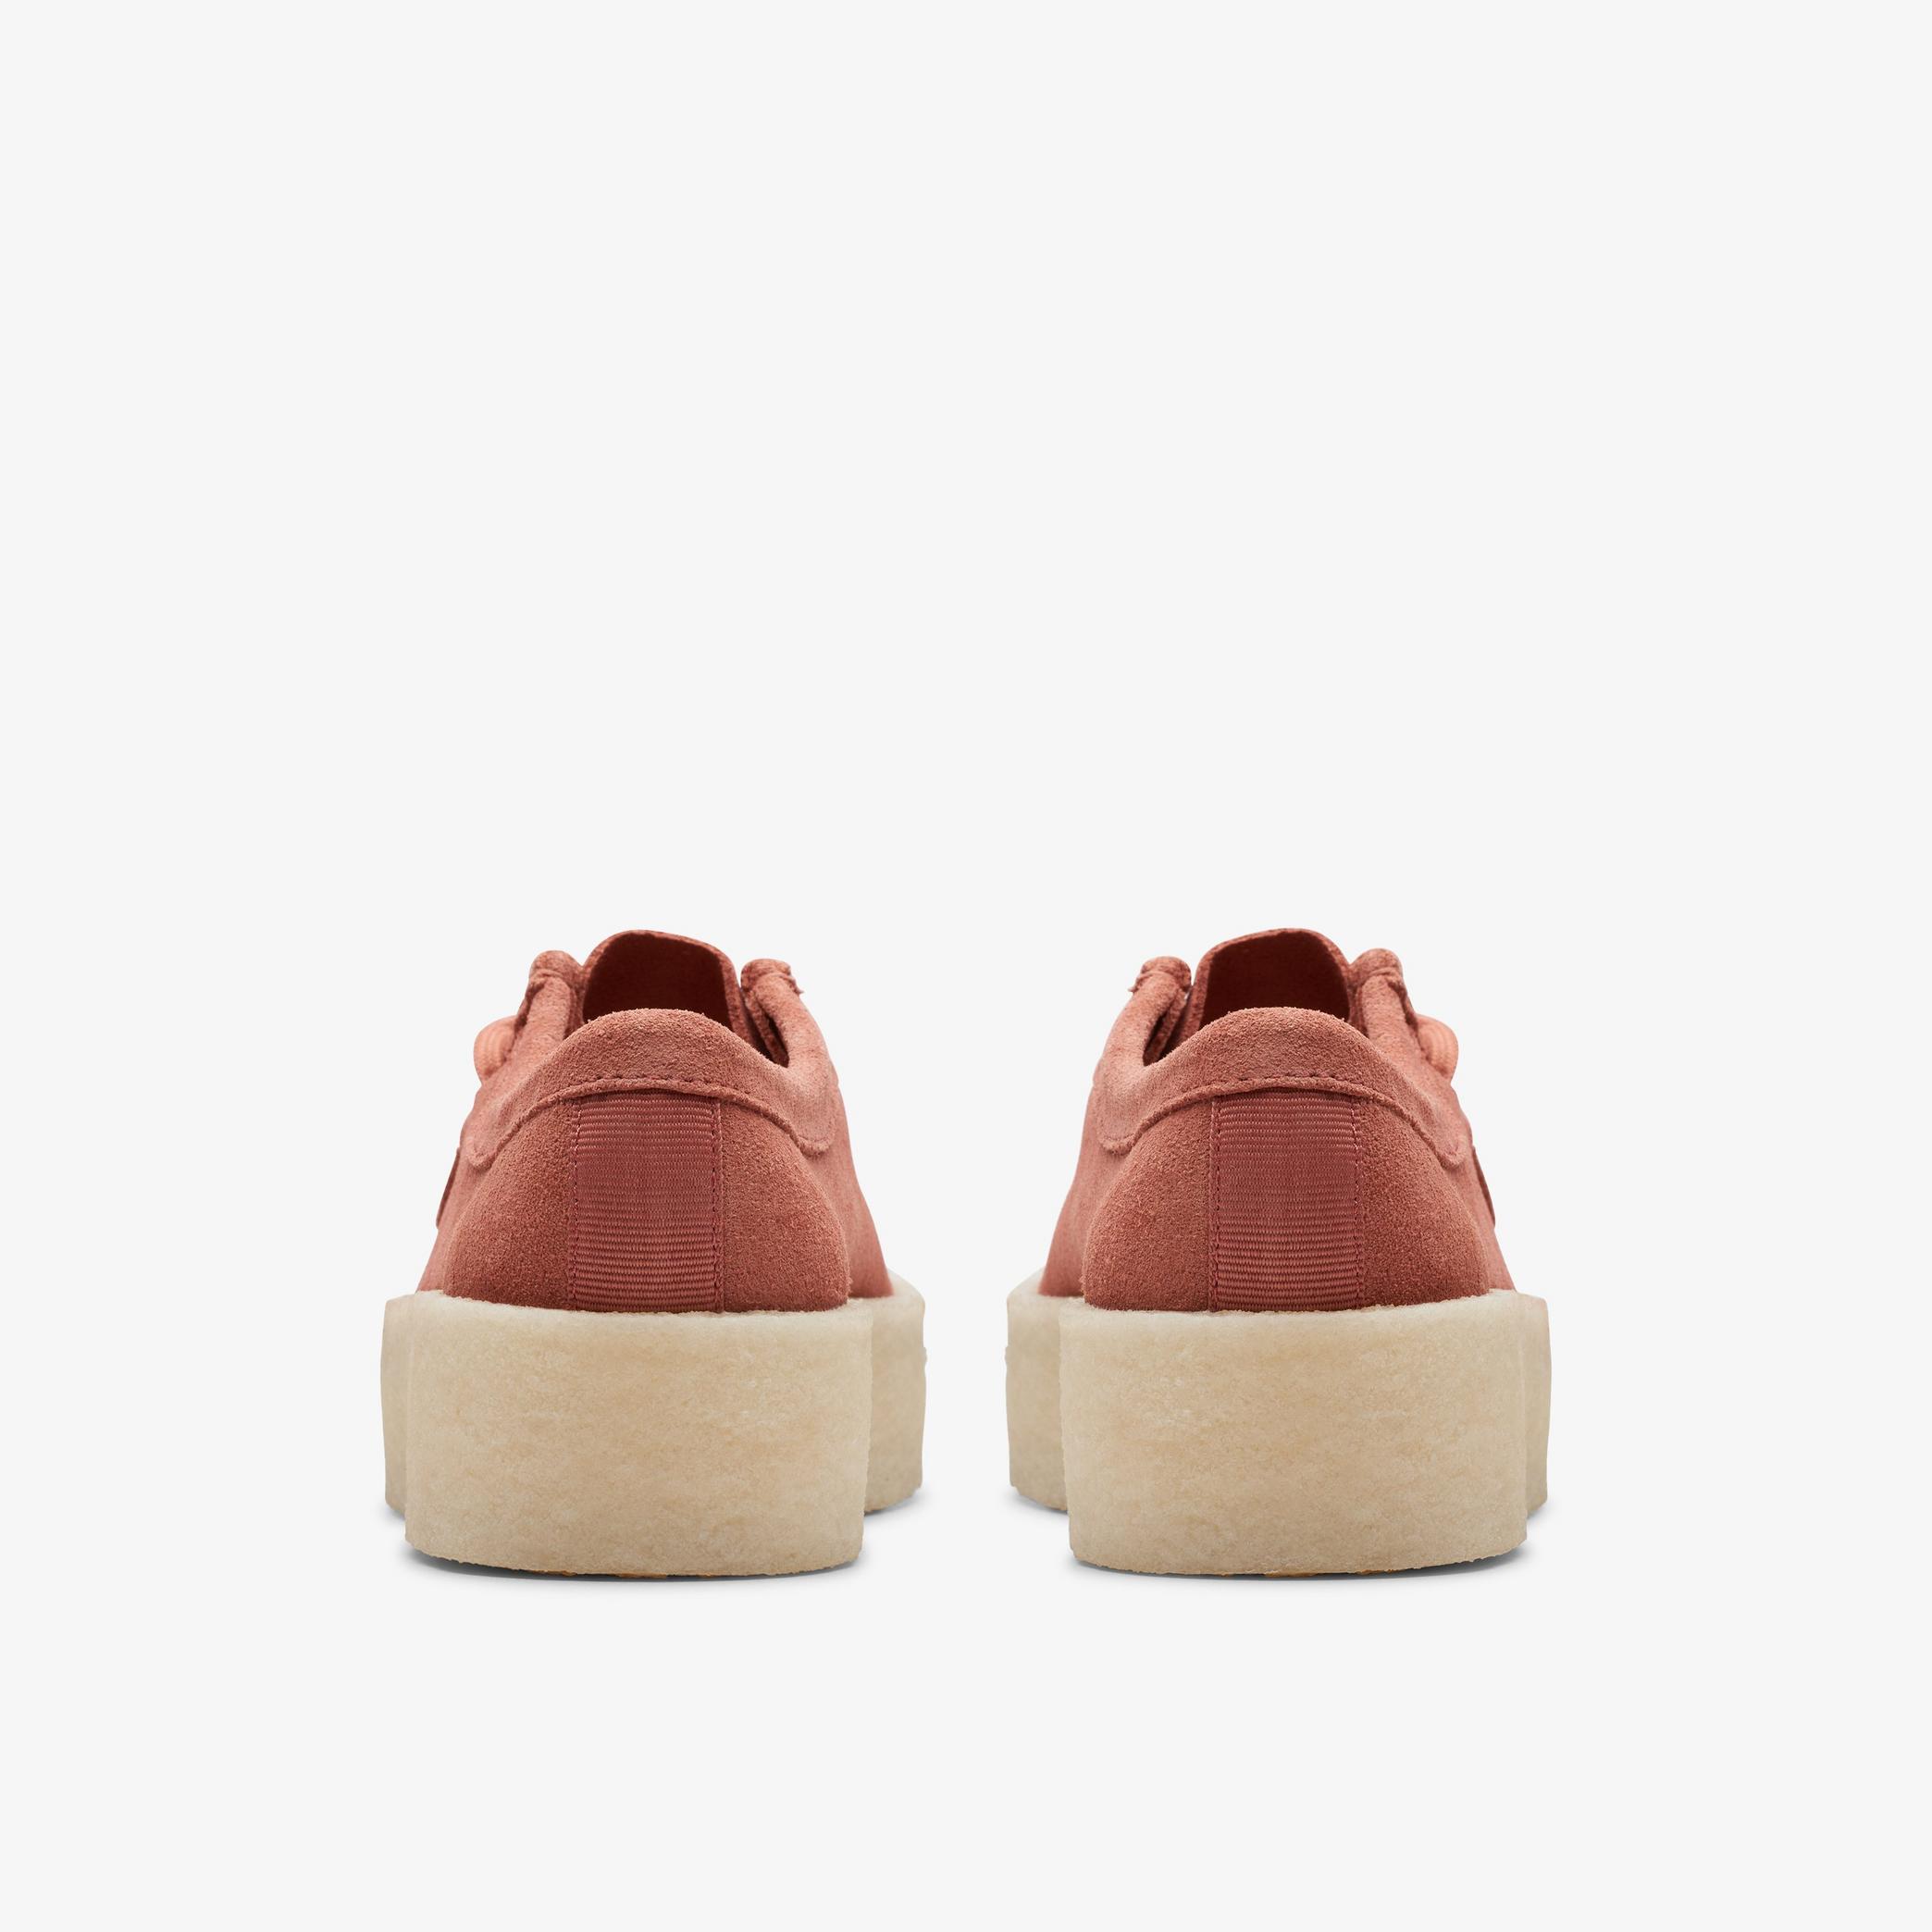 Wallabee Cup Terracotta Suede Wallabee, view 5 of 7